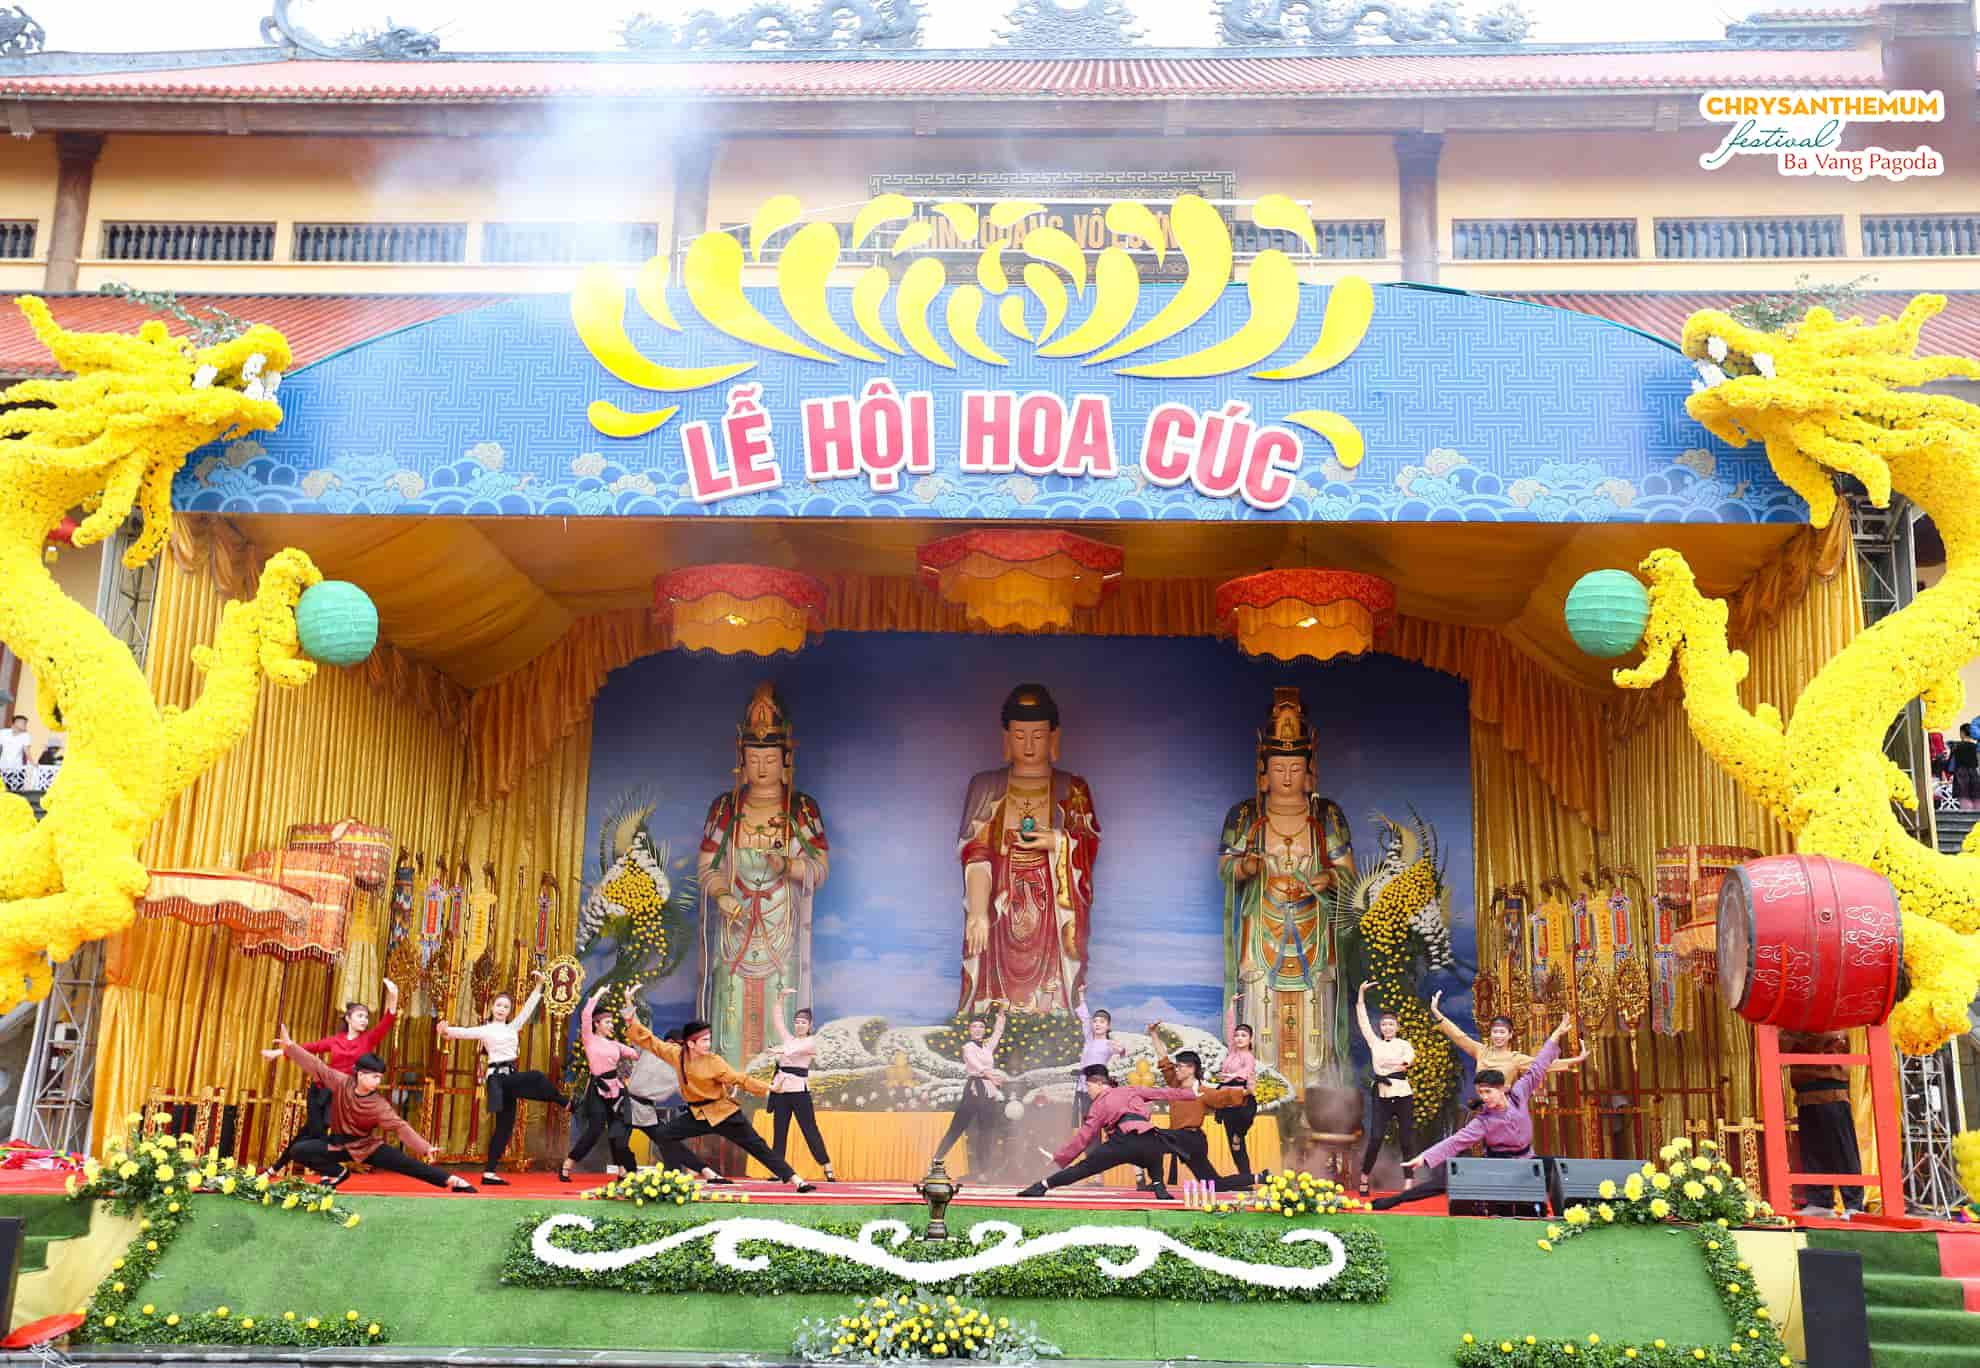 Performances at the Opening ceremony of Chrysanthemum Festival 2020 at Ba Vang Pagoda